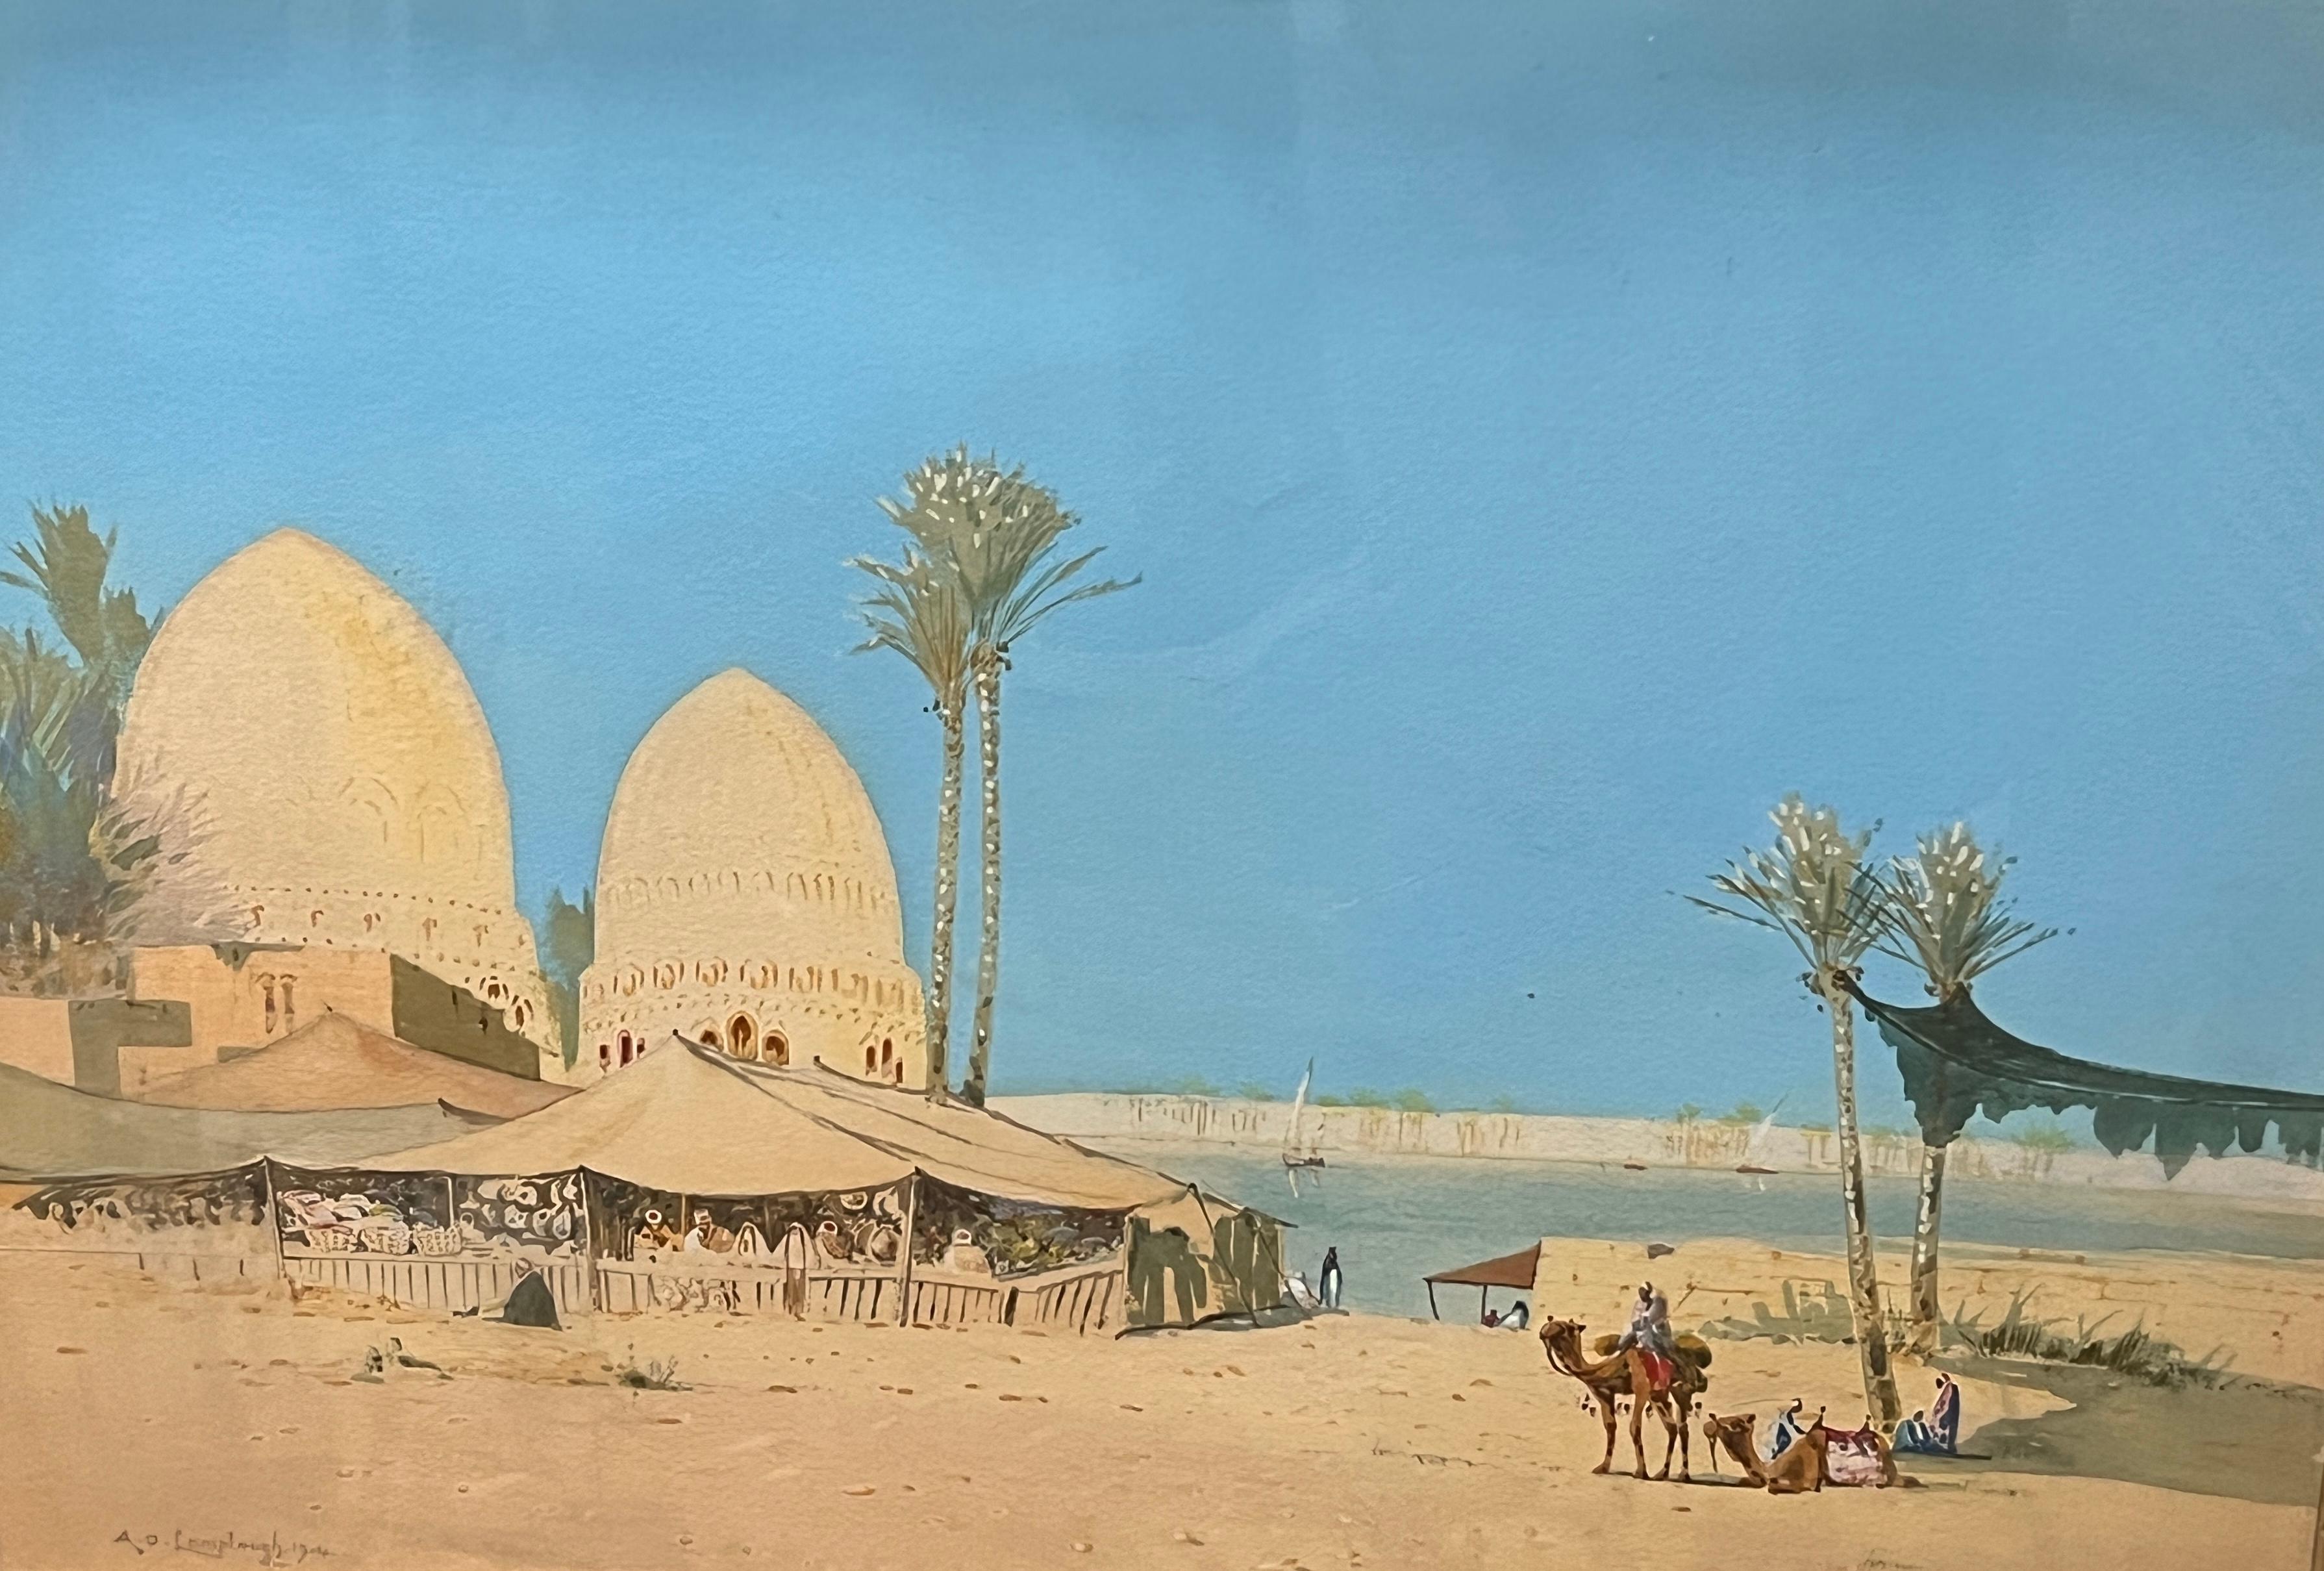 An eastern market tent, Nile Valley - Art by Augustus Osborne Lamplough R.W.S.